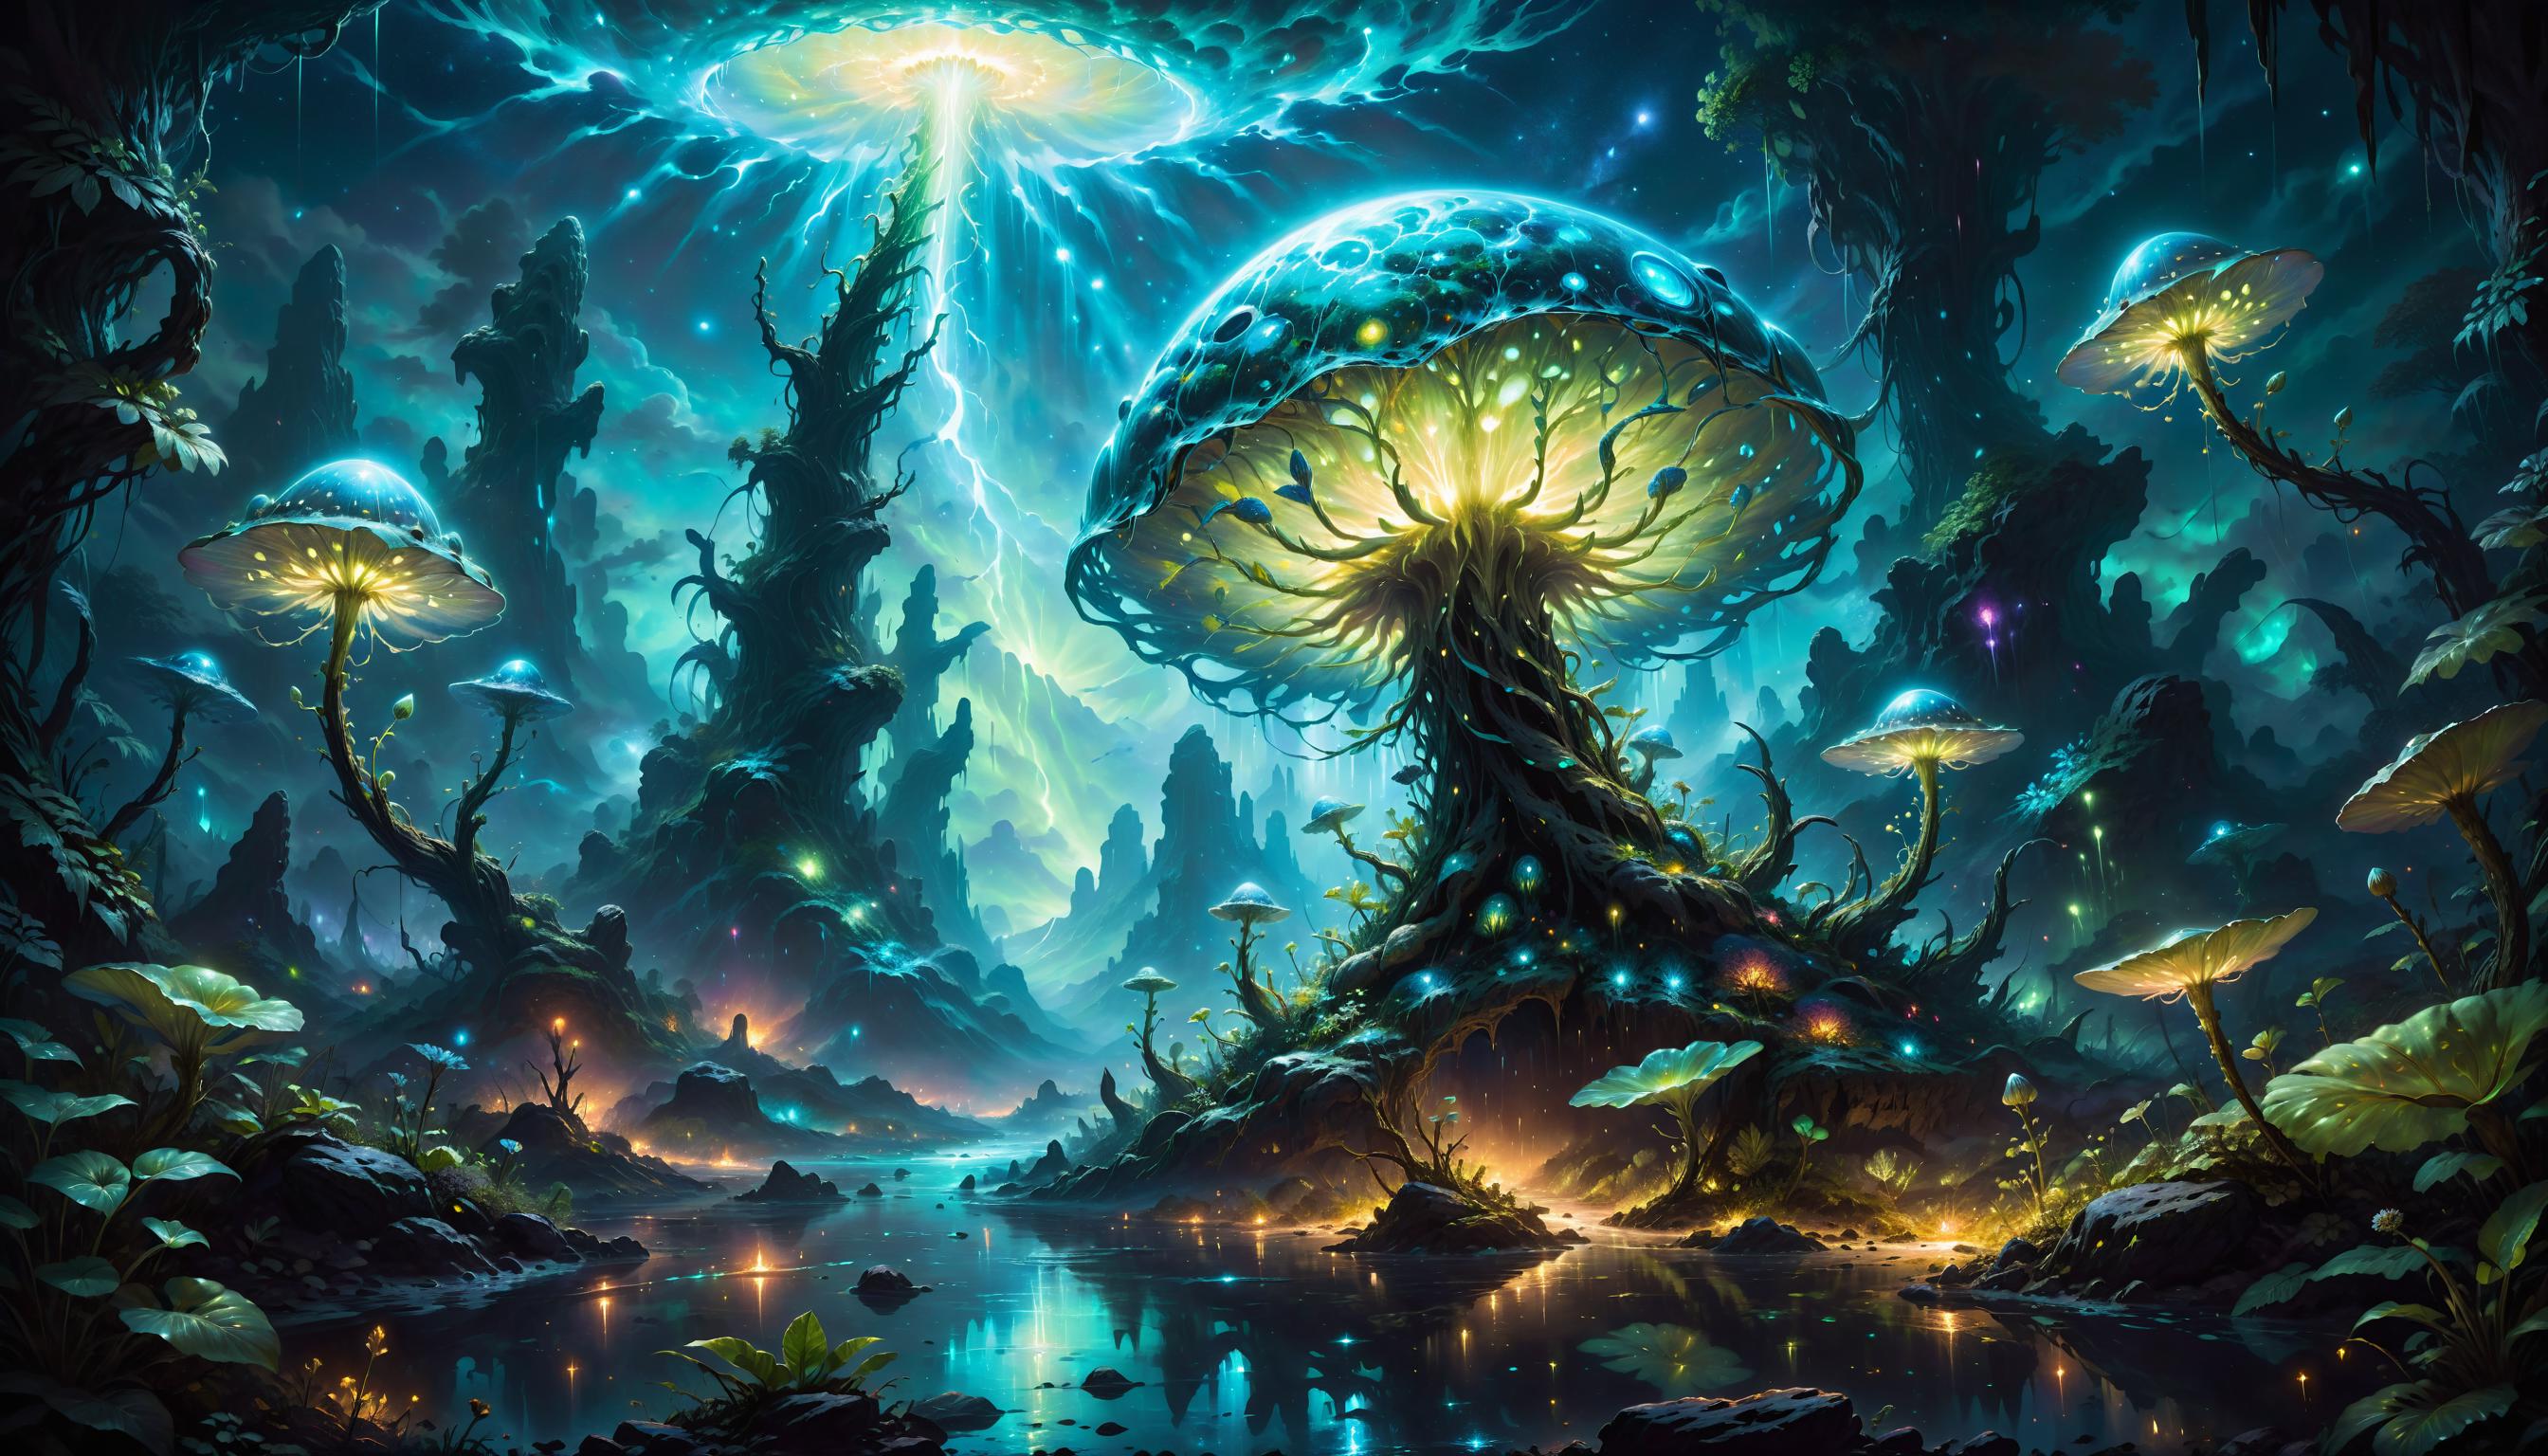 A fantasy art scene of a mushroom forest with a glowing mushroom tree and a waterfall.